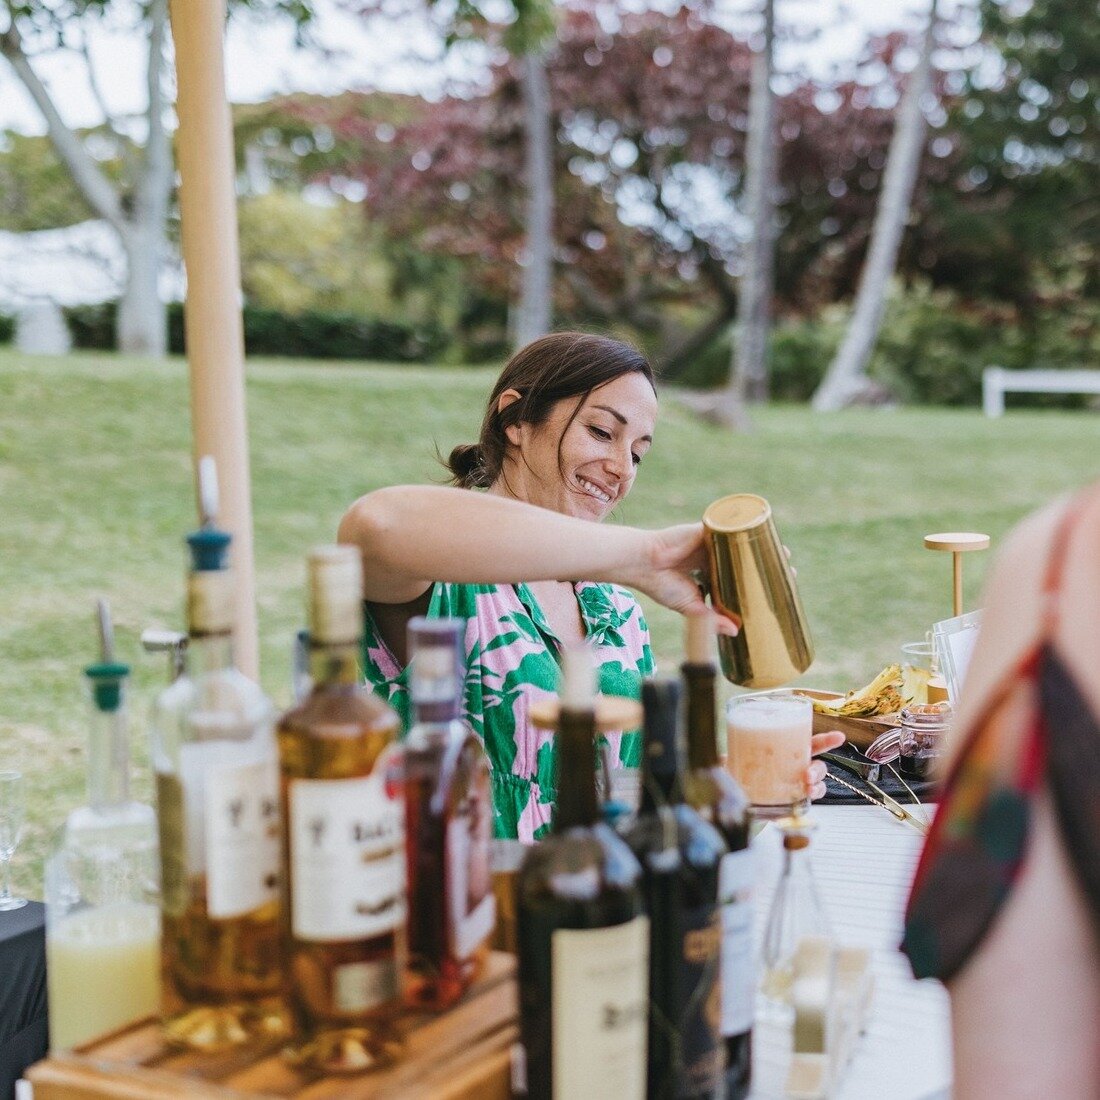 Mixing up smiles and spirits! 😊🍹 Bringing joy to every pour with a sprinkle of happiness and a dash of flair. Cheers to good vibes and great drinks! 🥂✨ 

@kualoaranchweddings 
@kenuikitchen 
@abcweddings 
@thetribephoto 
@frobabyproductions 
@aloh